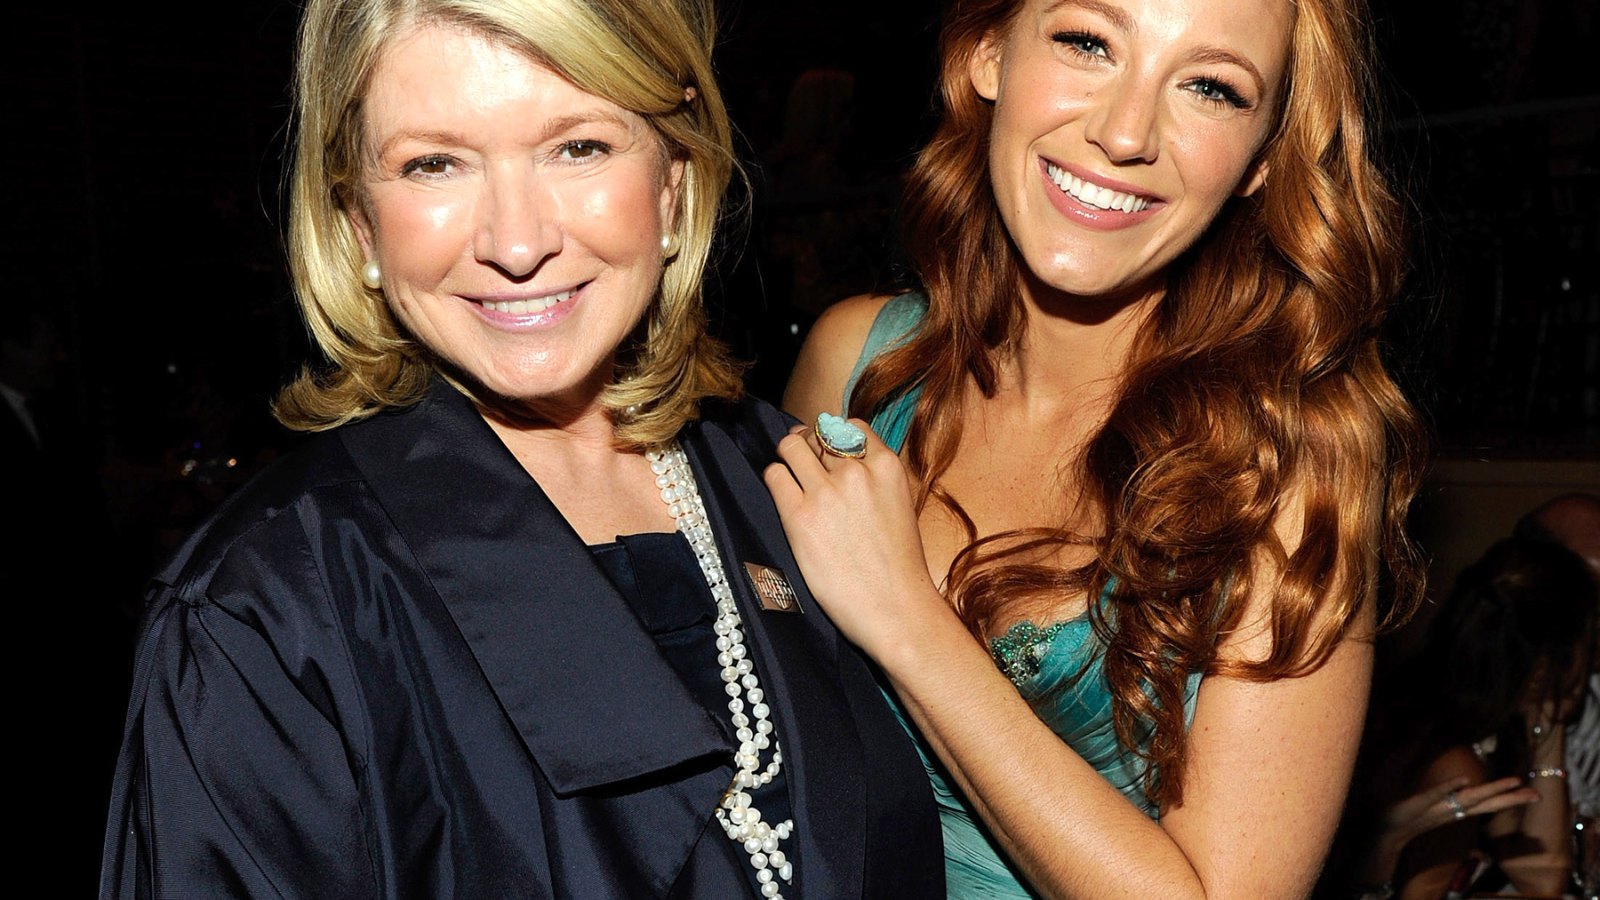 Martha Stewart and Blake Lively at the TIME 100 Gala on April 26, 2011